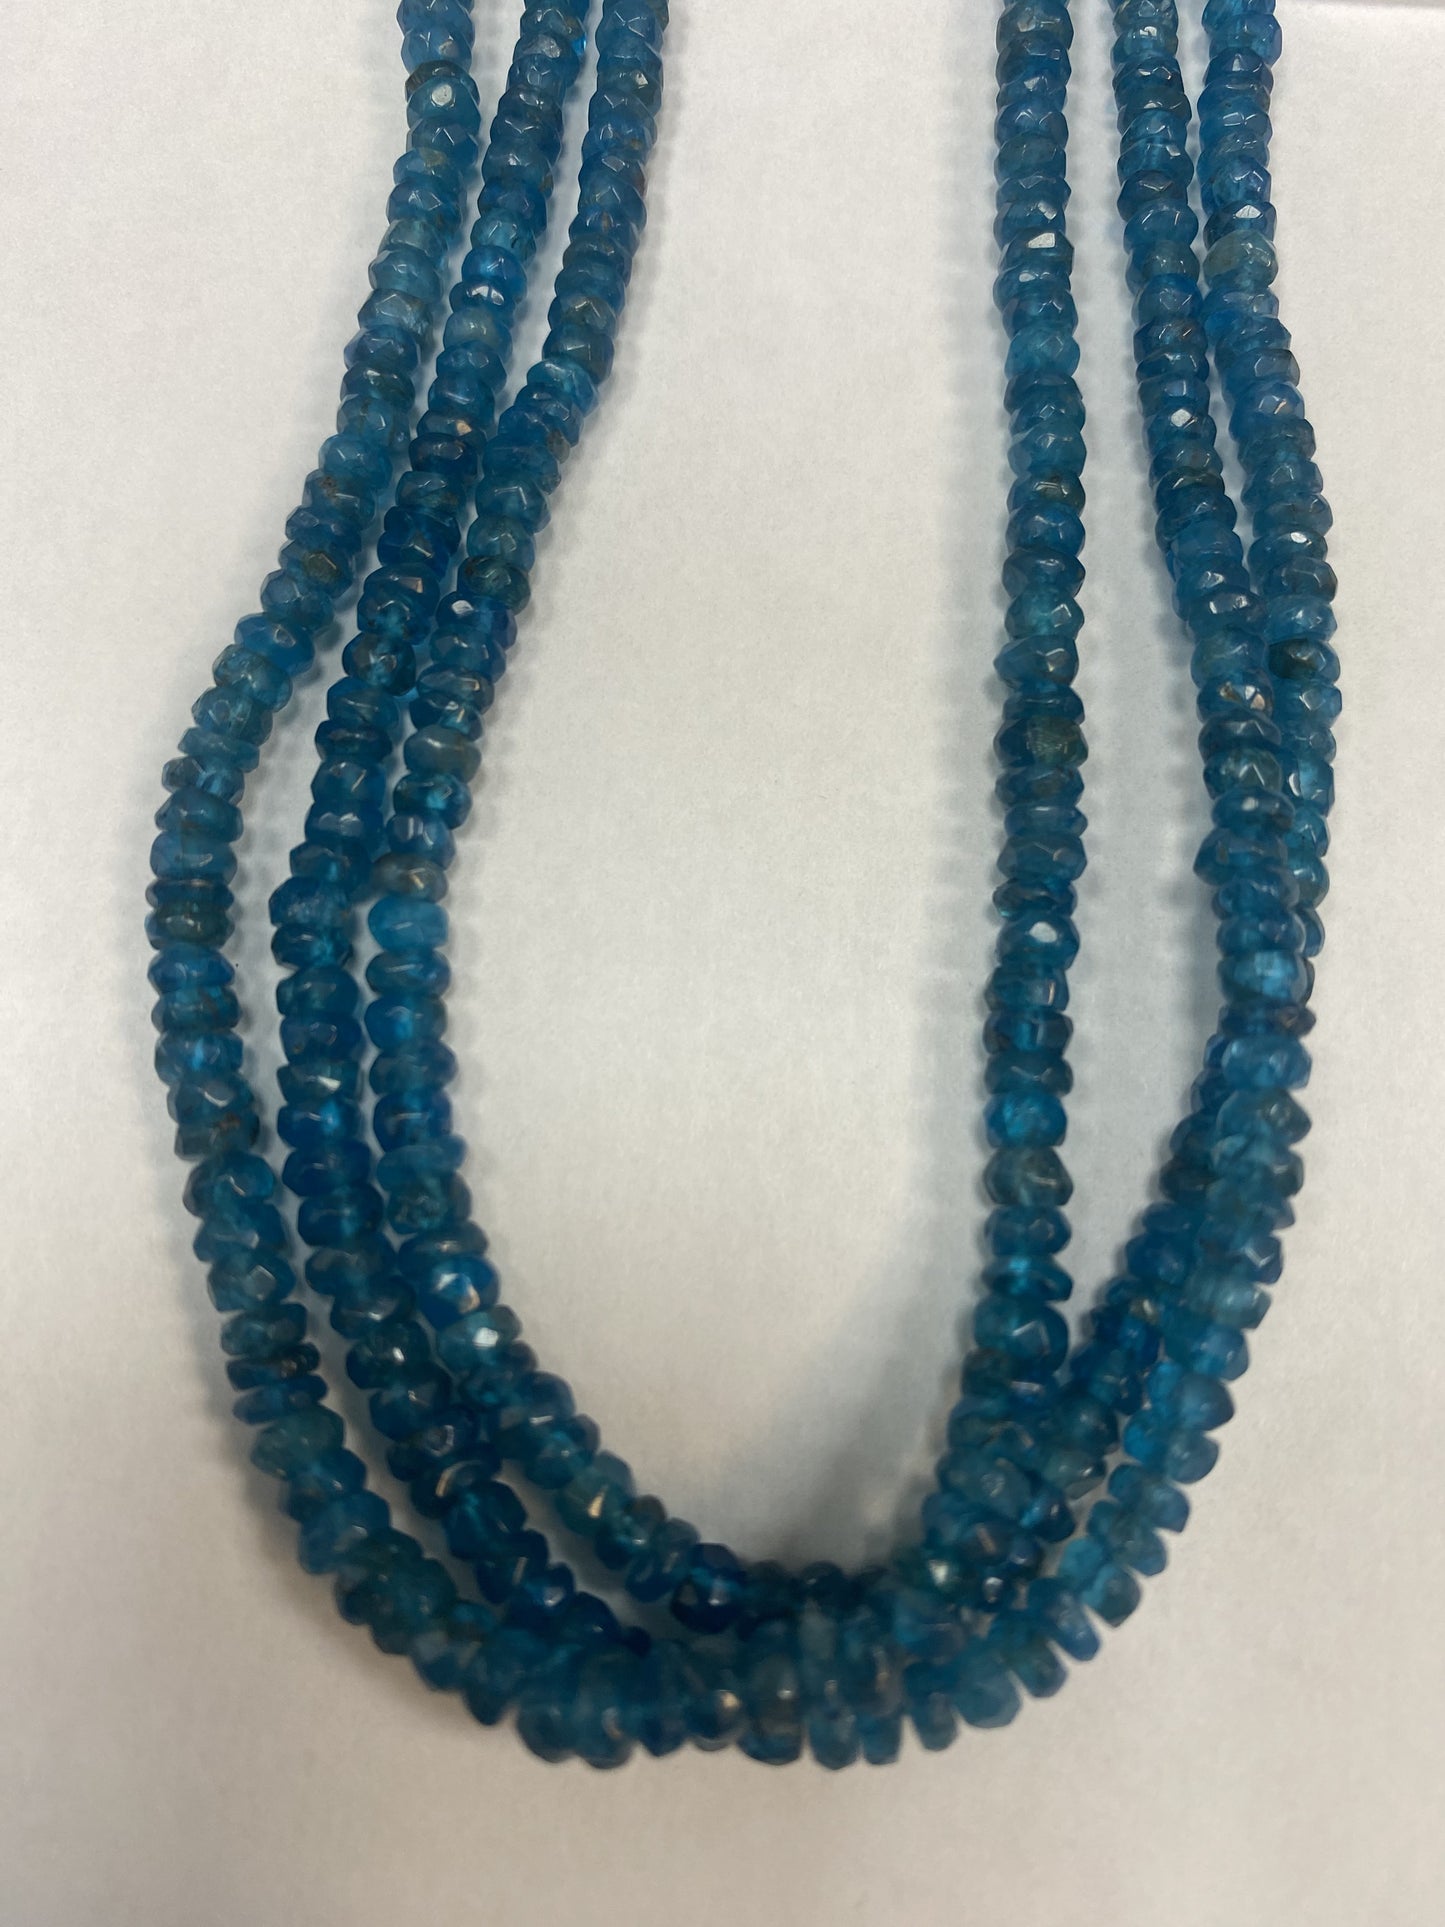 Neon Apatite Faceted Rondelle 3-4MM